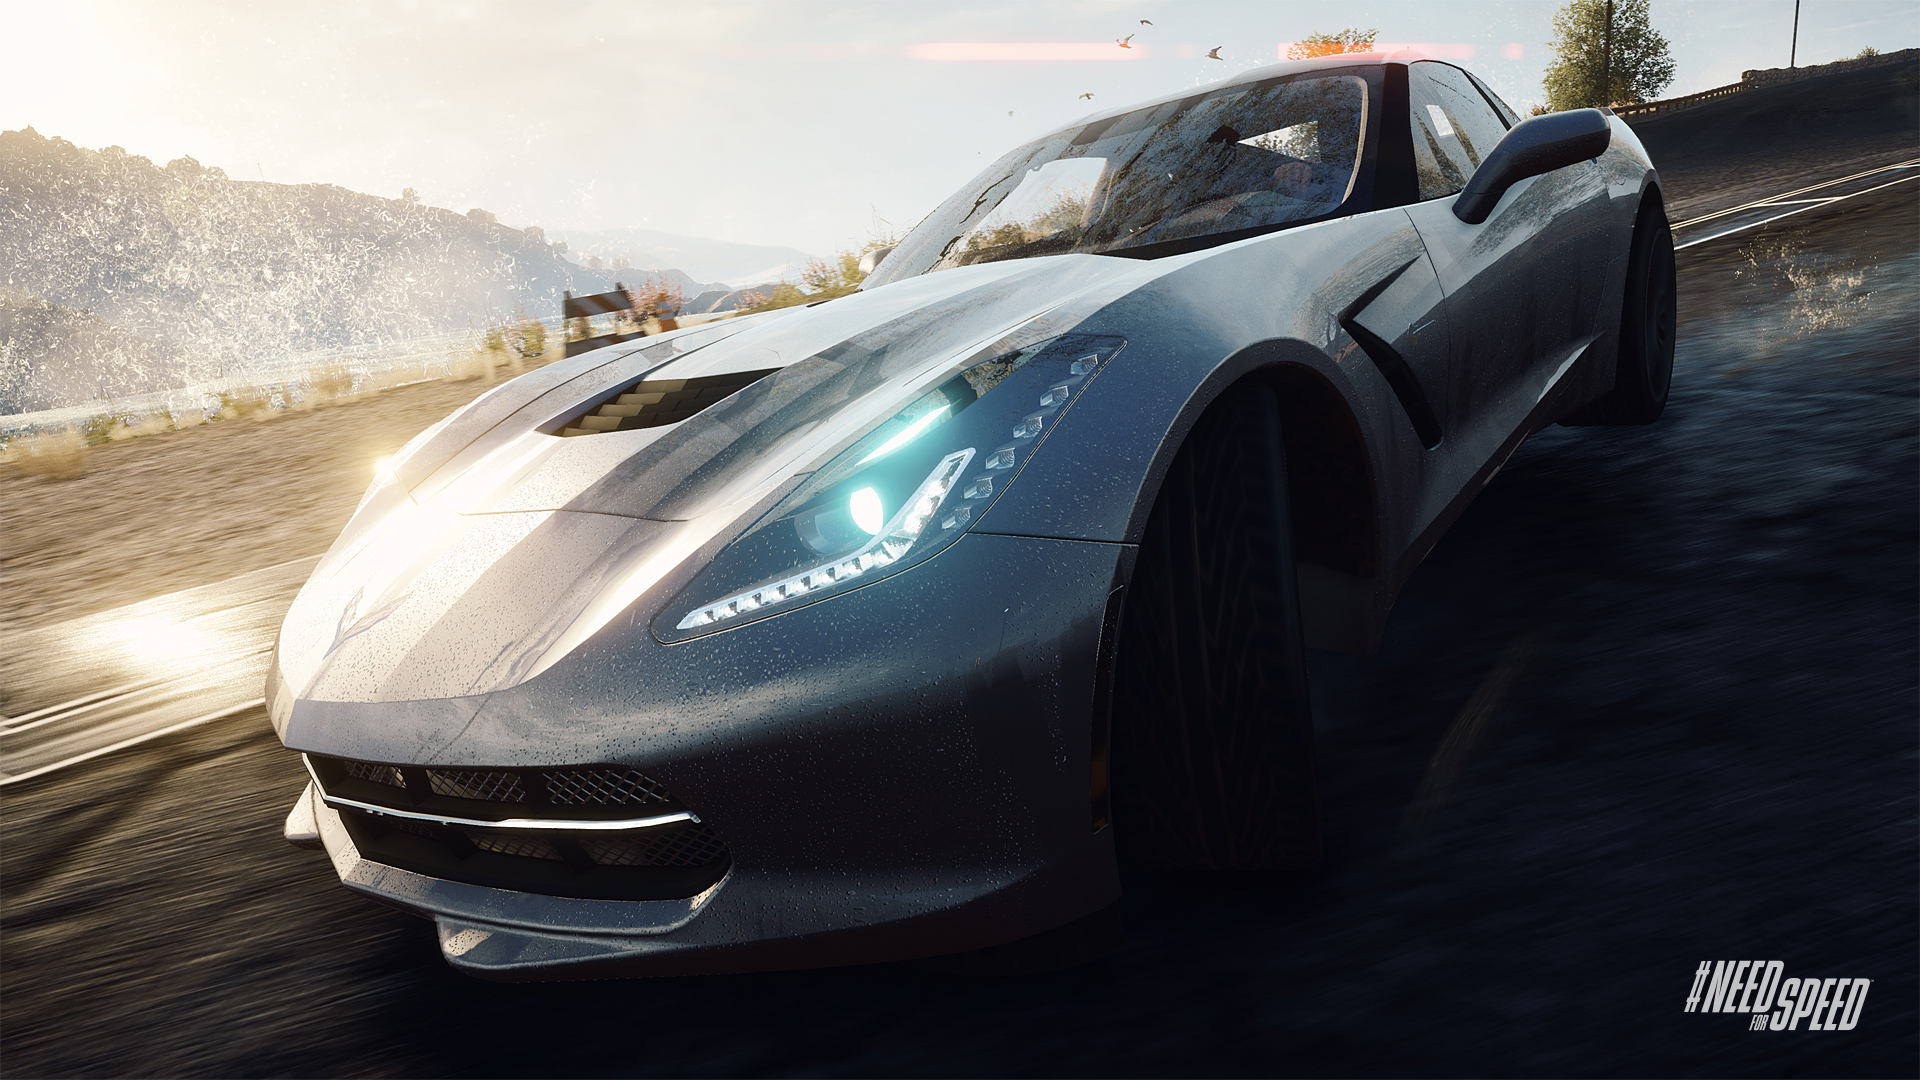 New Trailers for FIFA 14 and Need for Speed Rivals